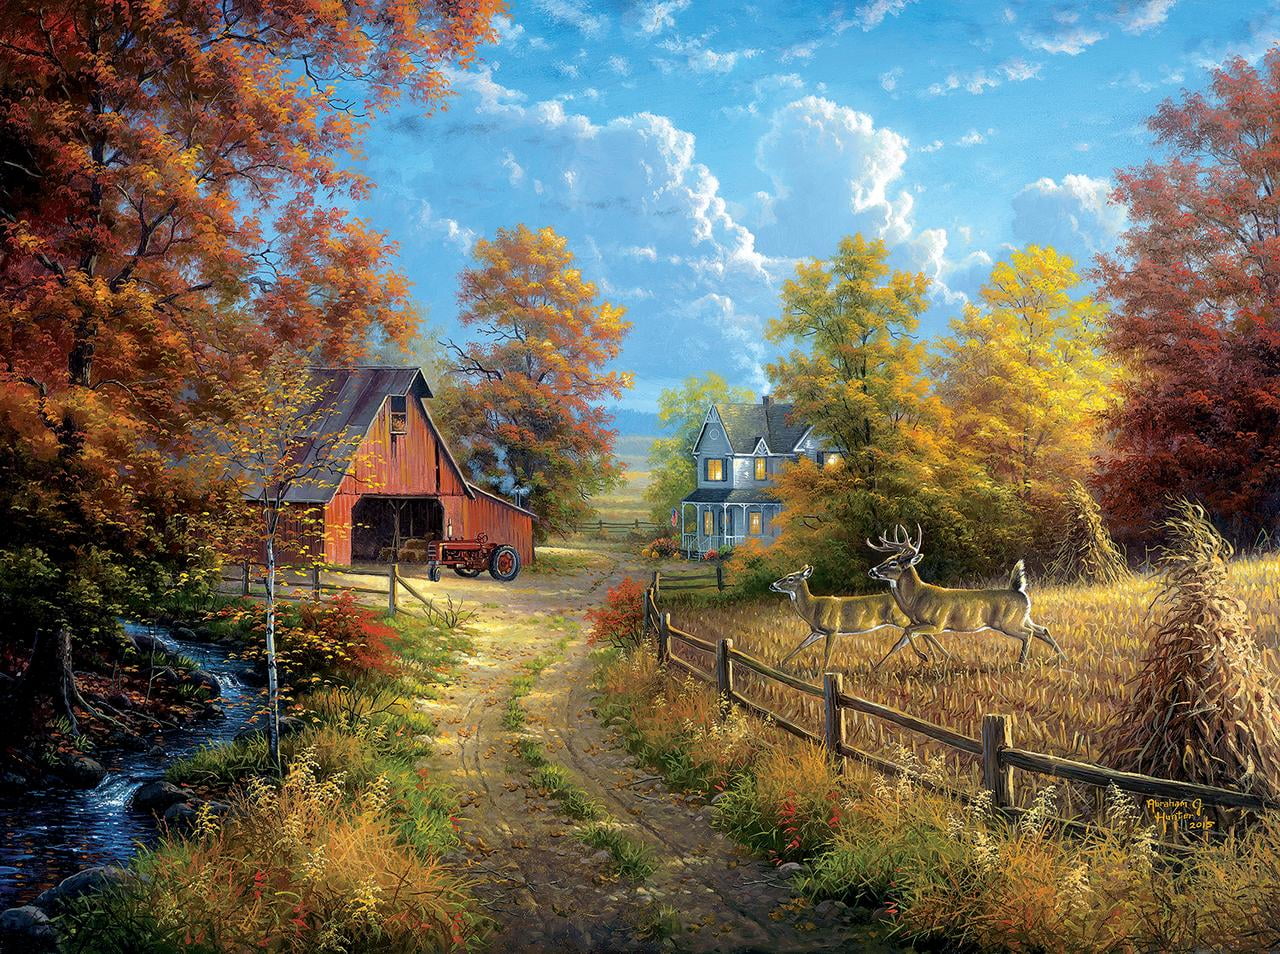 Down The Country Road Jigsaw Puzzle - Walmart.com